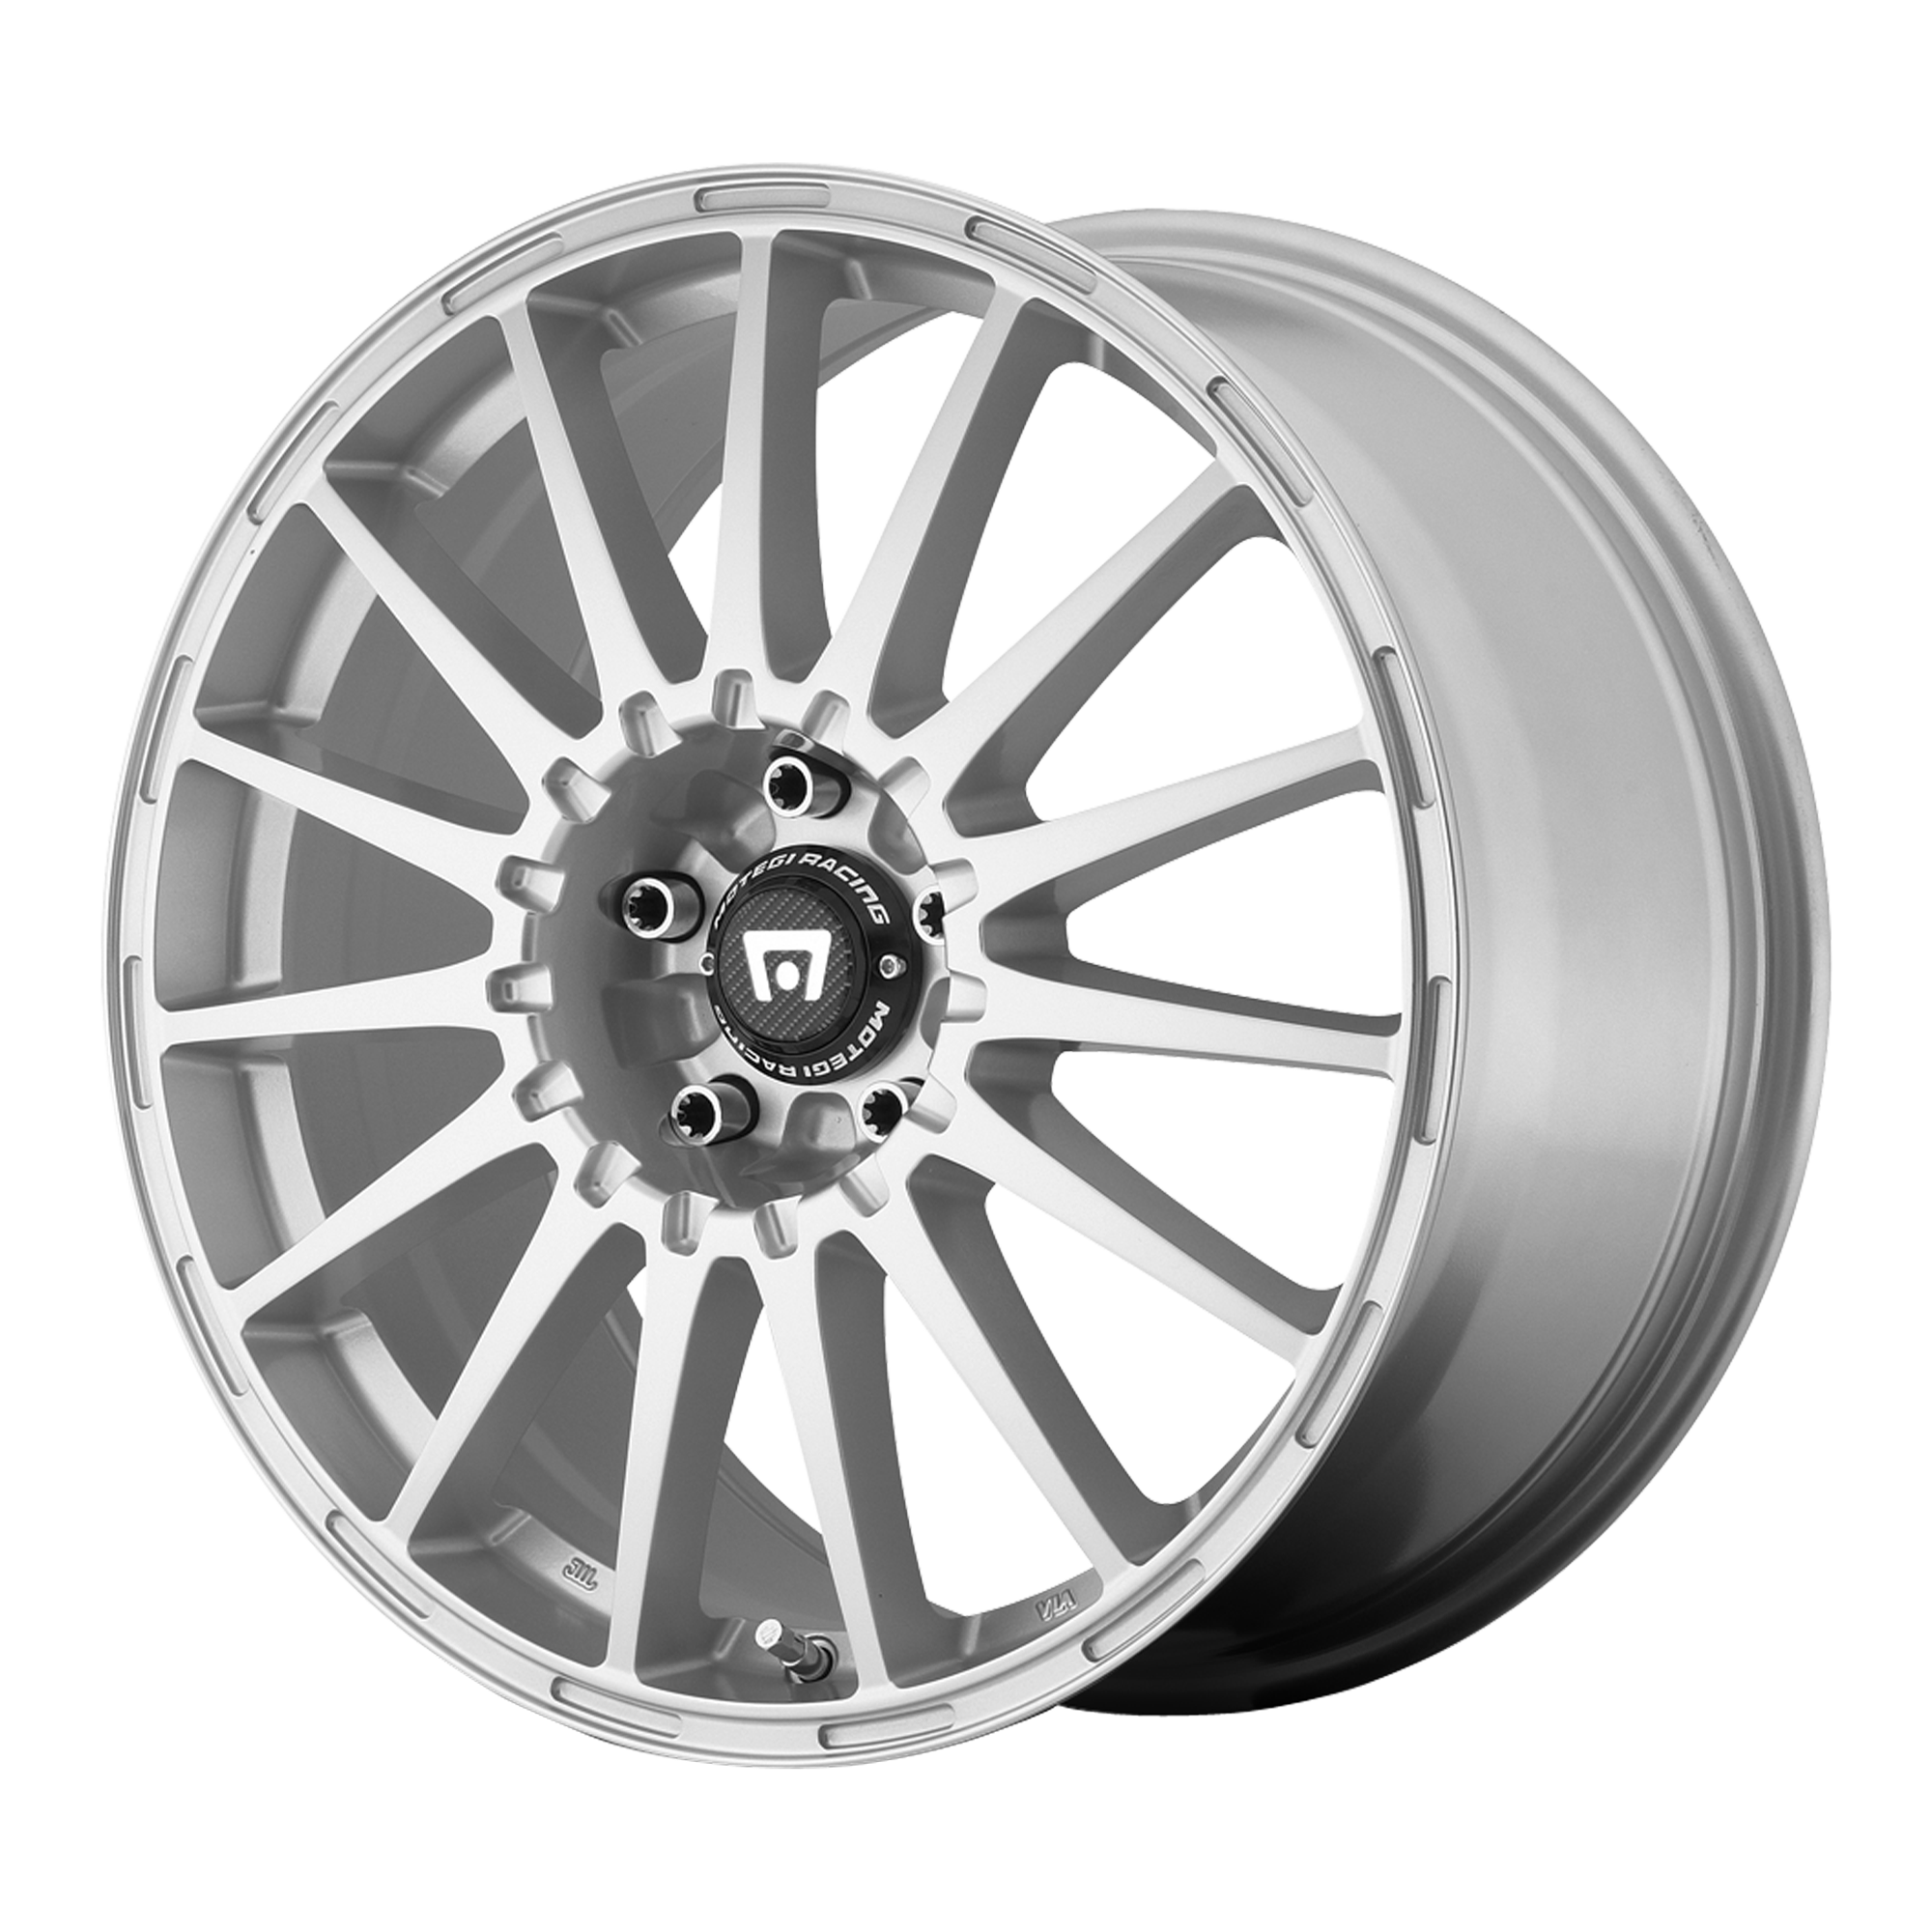 Motegi MR119 RALLY CROSS S 17X7 40 5X114.3/5X4.5 Bright Silver With Clearcoat